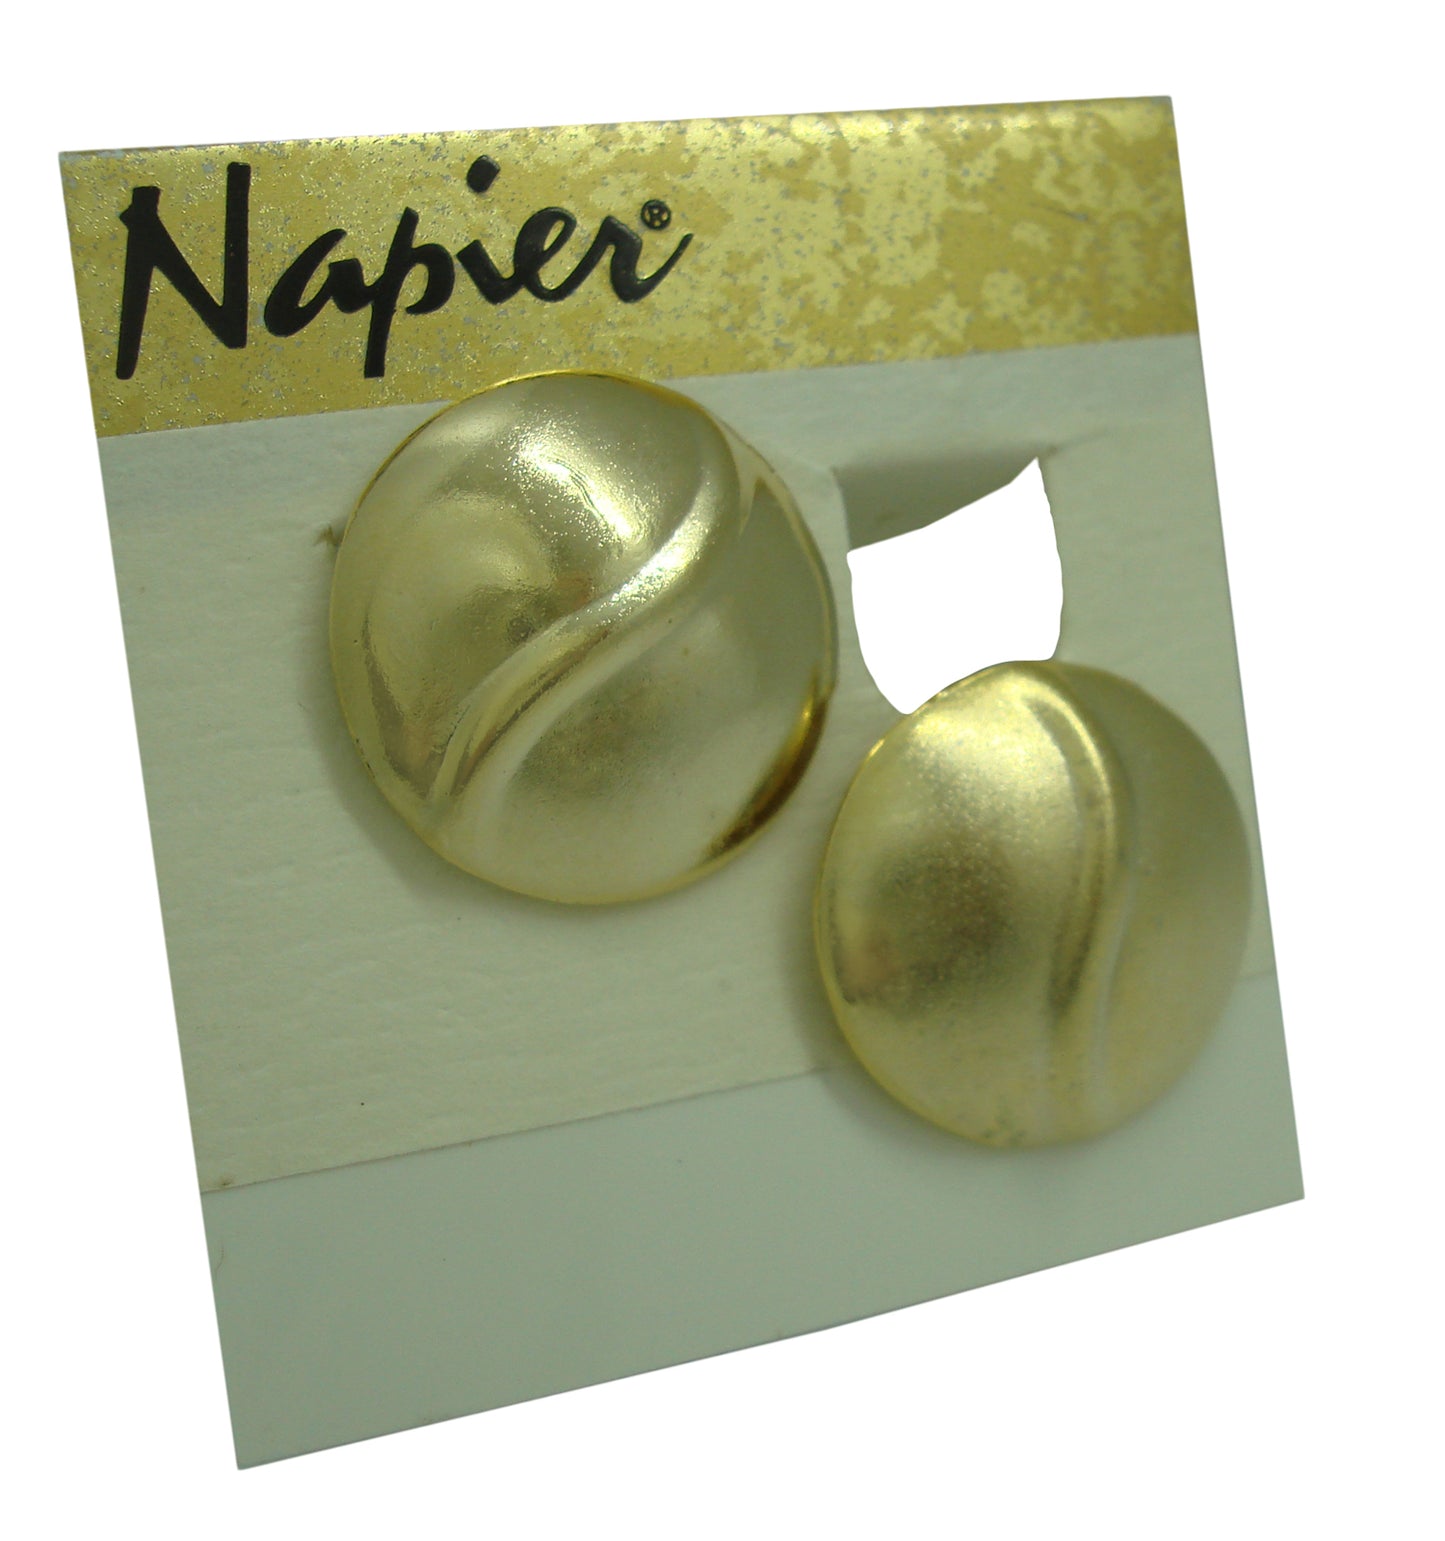 Napier Gold Tone Round Button Clip On Earrings 80s Vintage 7/8" NOS NWT